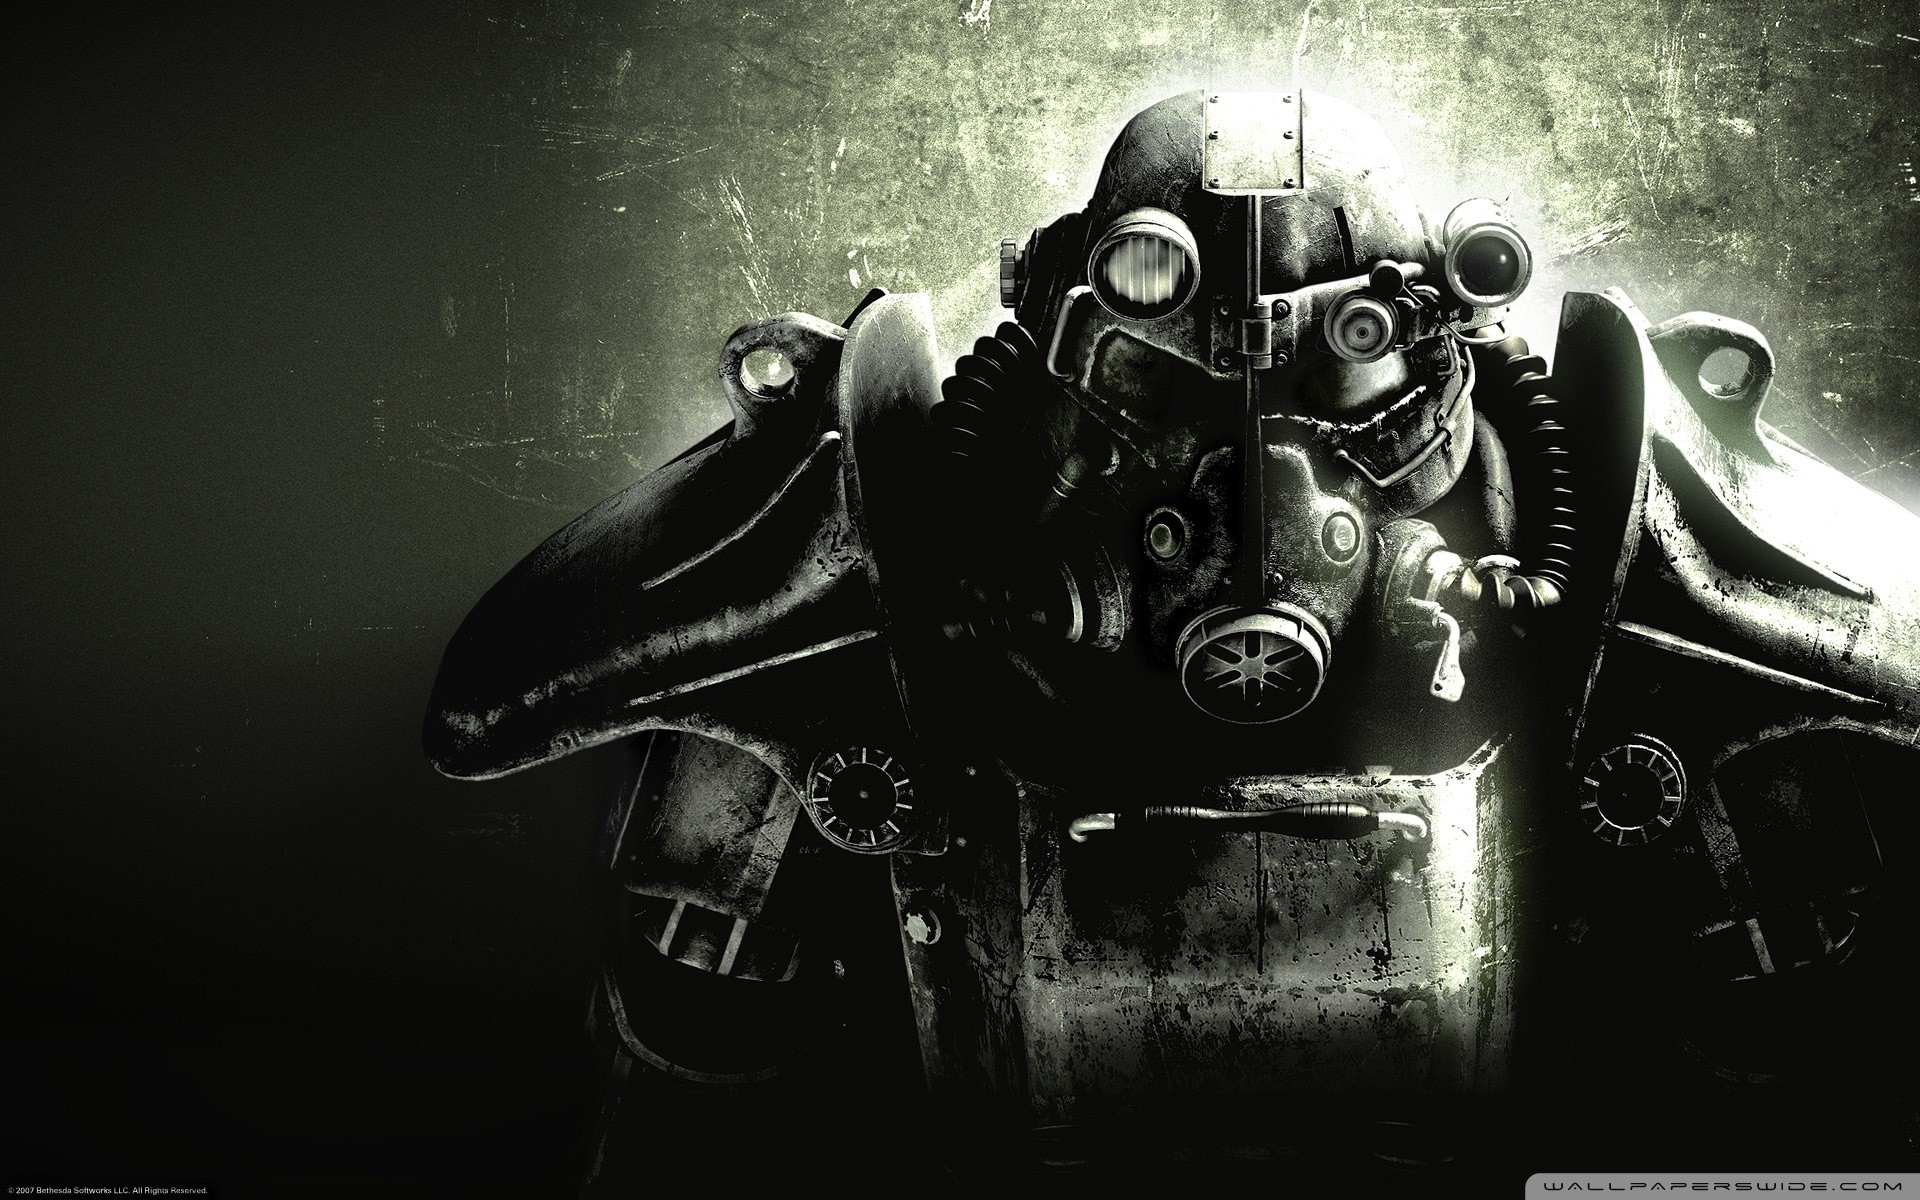 Fallout New Vegas HD Wallpapers Backgrounds Wallpaper HD Wallpapers Pinterest Fallout, Wallpaper and Wallpaper backgrounds